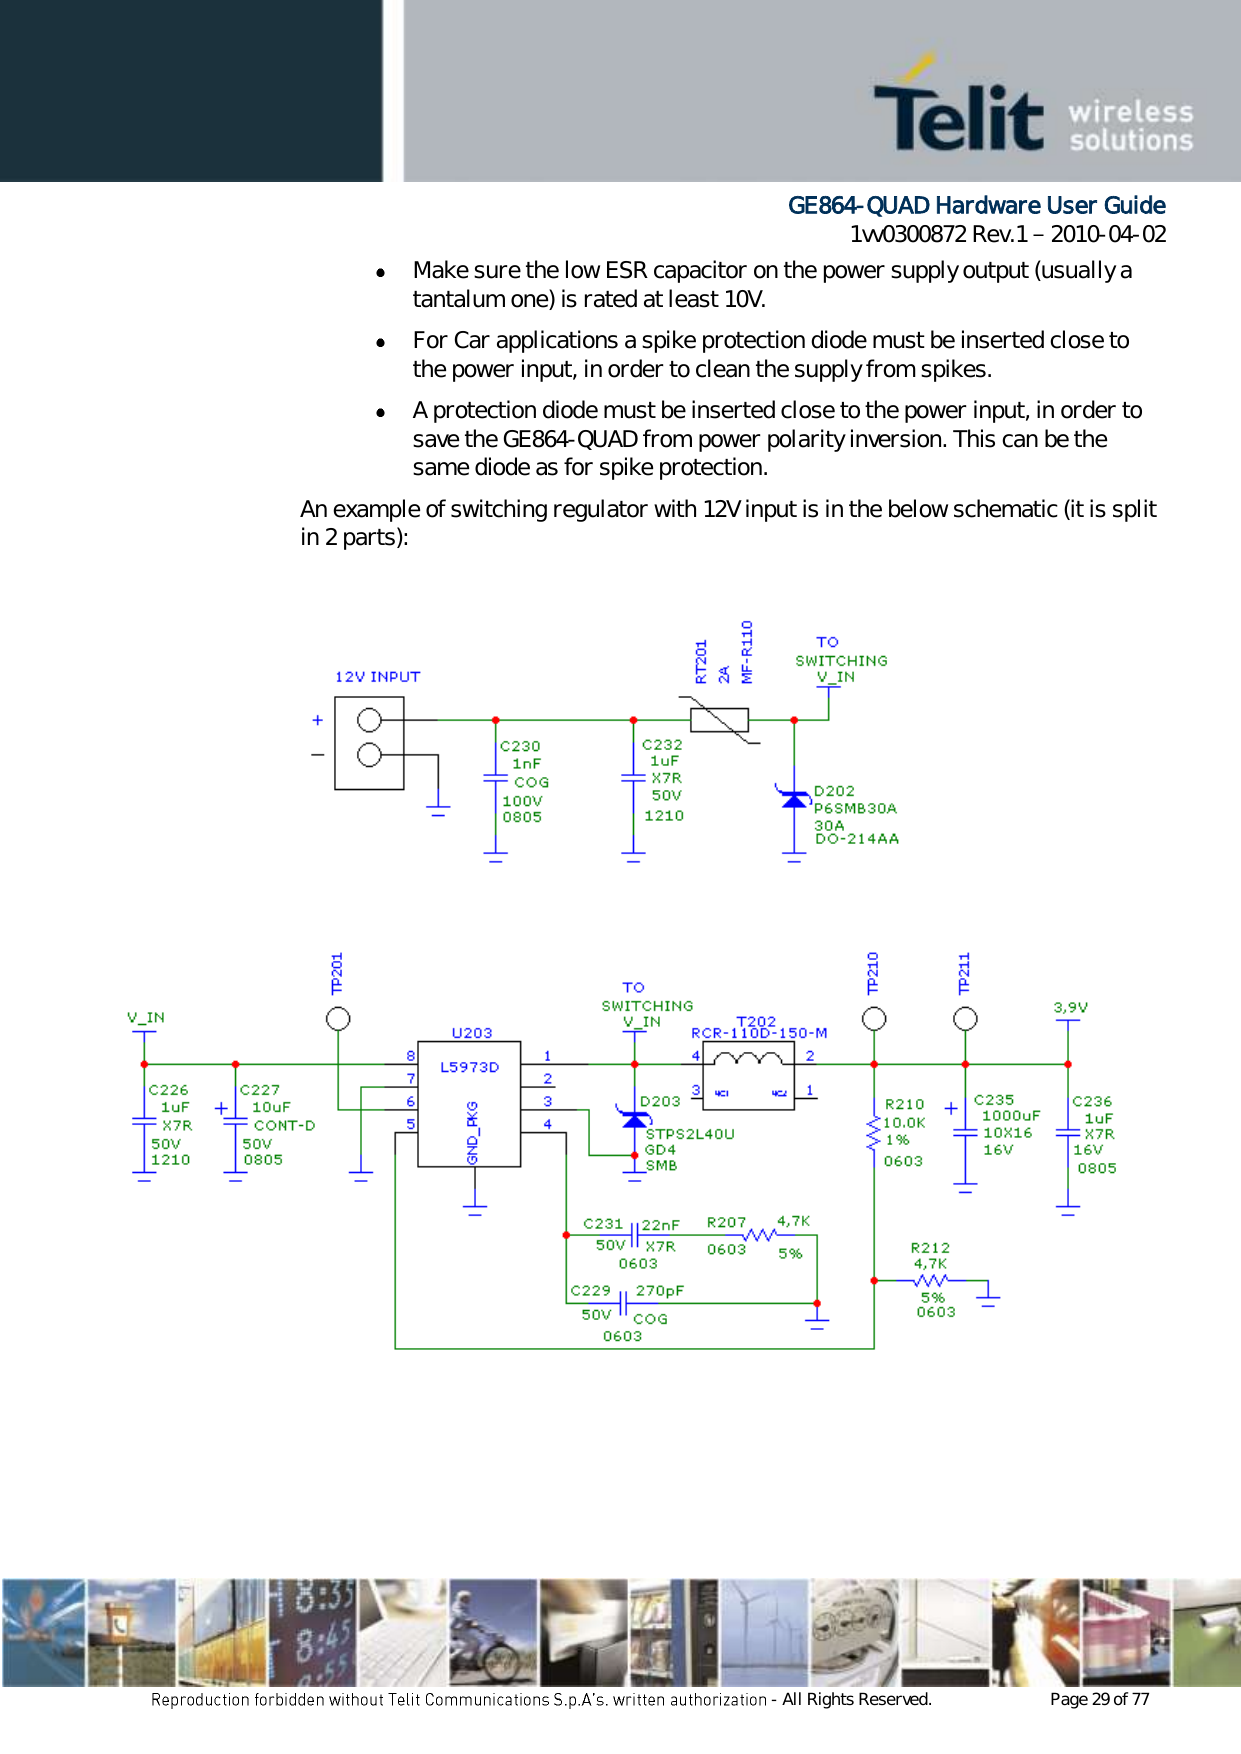      GE864-QUAD Hardware User Guide 1vv0300872 Rev.1   2010-04-02 - All Rights Reserved.    Page 29 of 77   Make sure the low ESR capacitor on the power supply output (usually a tantalum one) is rated at least 10V.  For Car applications a spike protection diode must be inserted close to the power input, in order to clean the supply from spikes.   A protection diode must be inserted close to the power input, in order to save the GE864-QUAD from power polarity inversion. This can be the same diode as for spike protection. An example of switching regulator with 12V input is in the below schematic (it is split in 2 parts):       